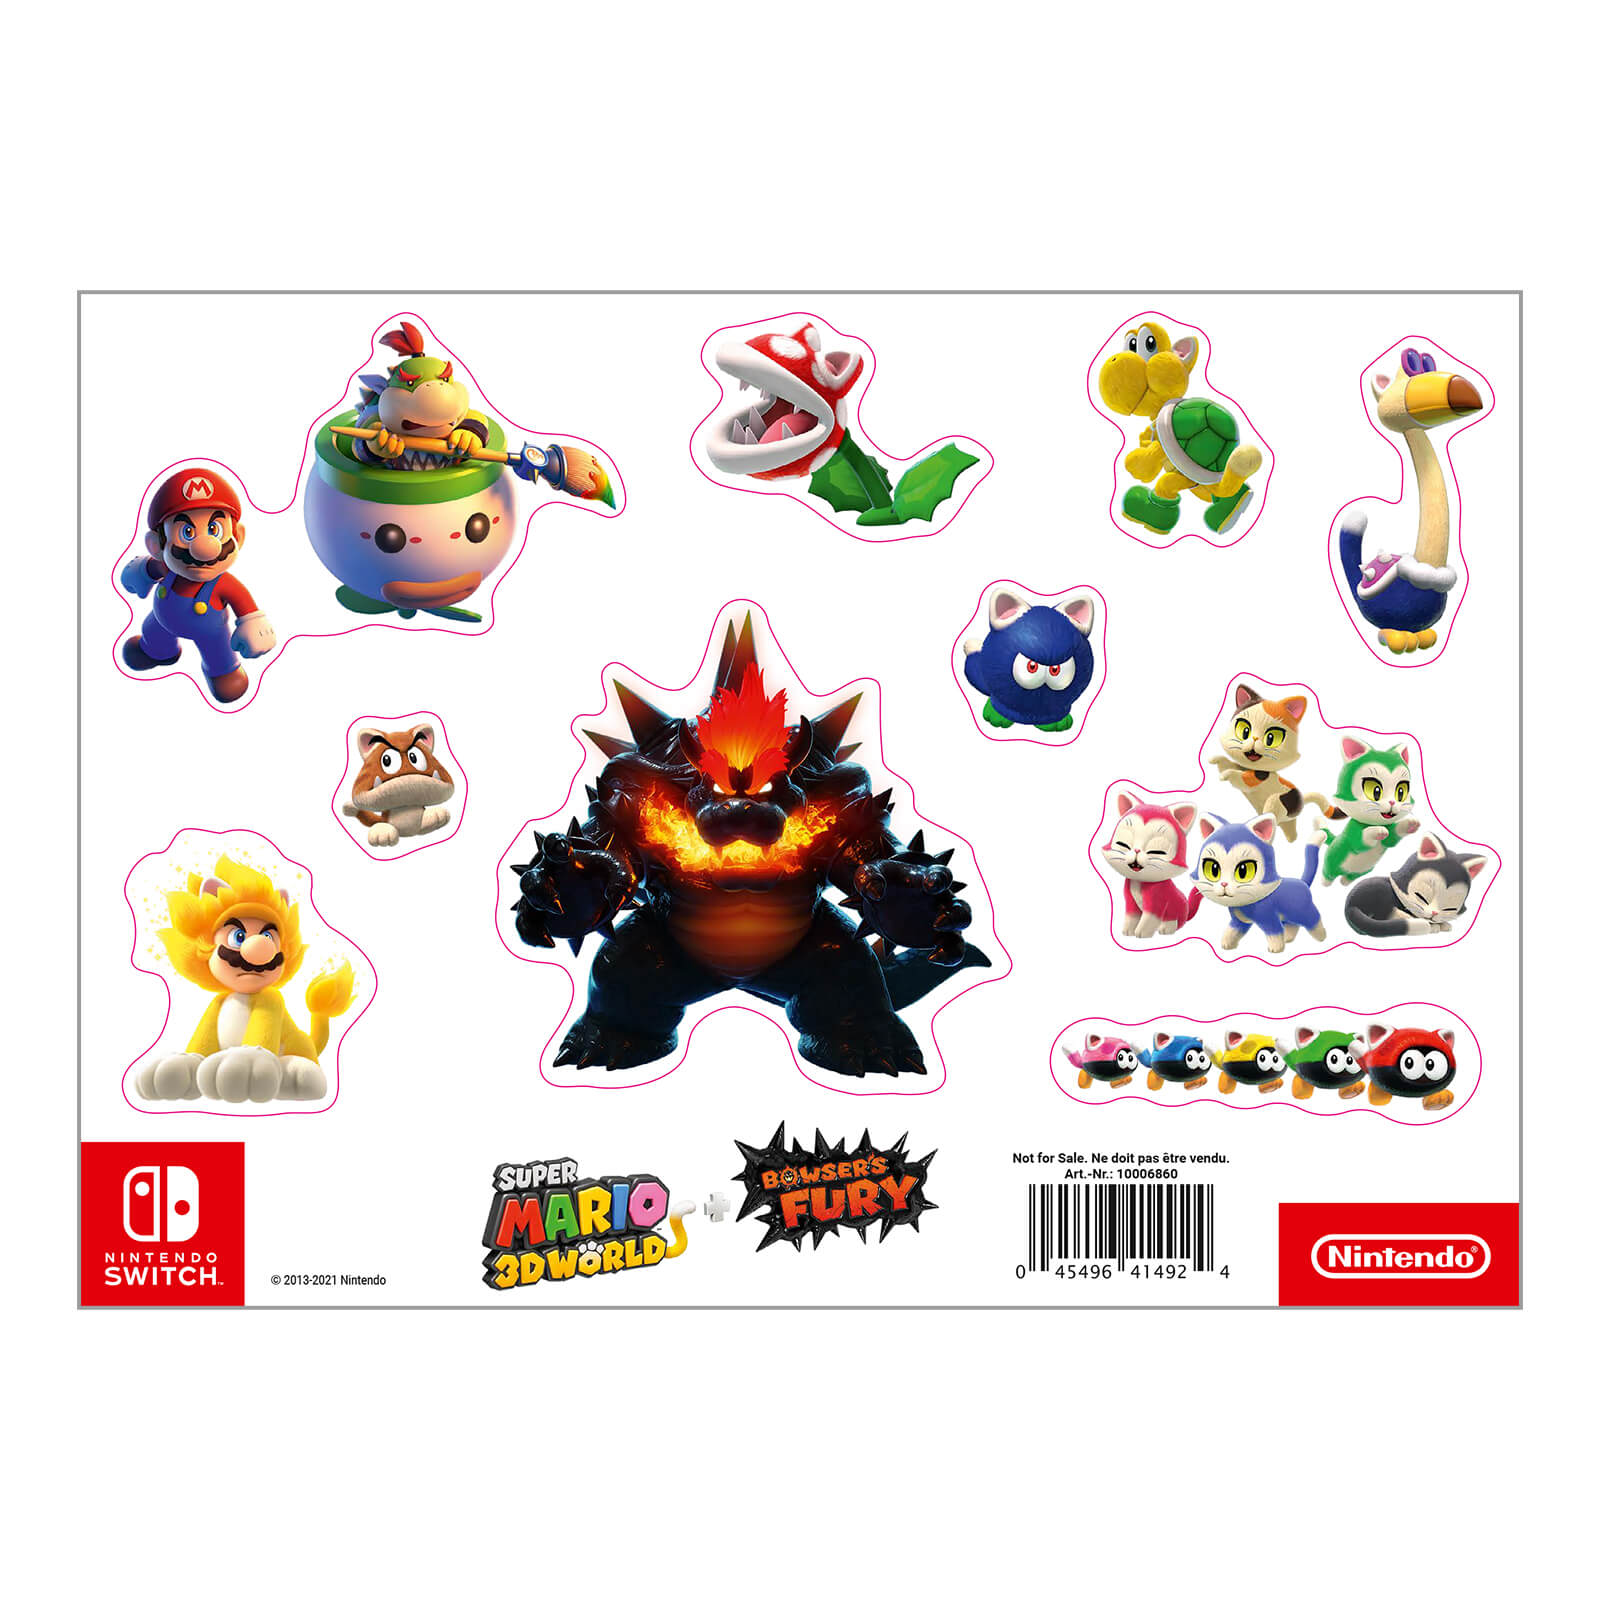 super mario 3d world and bowsers fury sticker sheet photo